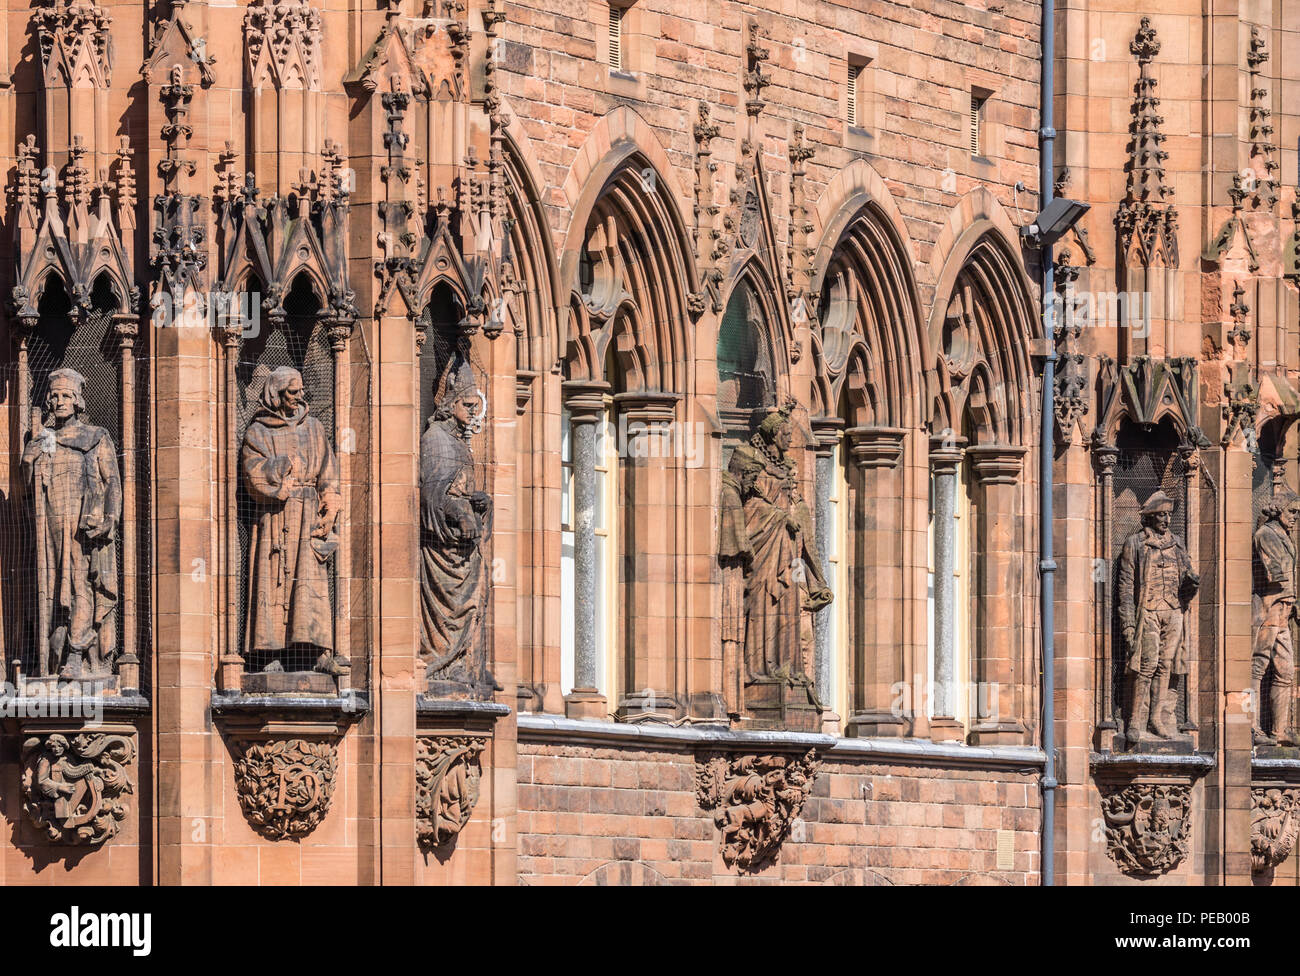 Edinburgh, Scotland, UK - June 13, 2012: Closeup of Row of statues of historic individuals on facade in brown stone of Scottish National Portrait Gall Stock Photo